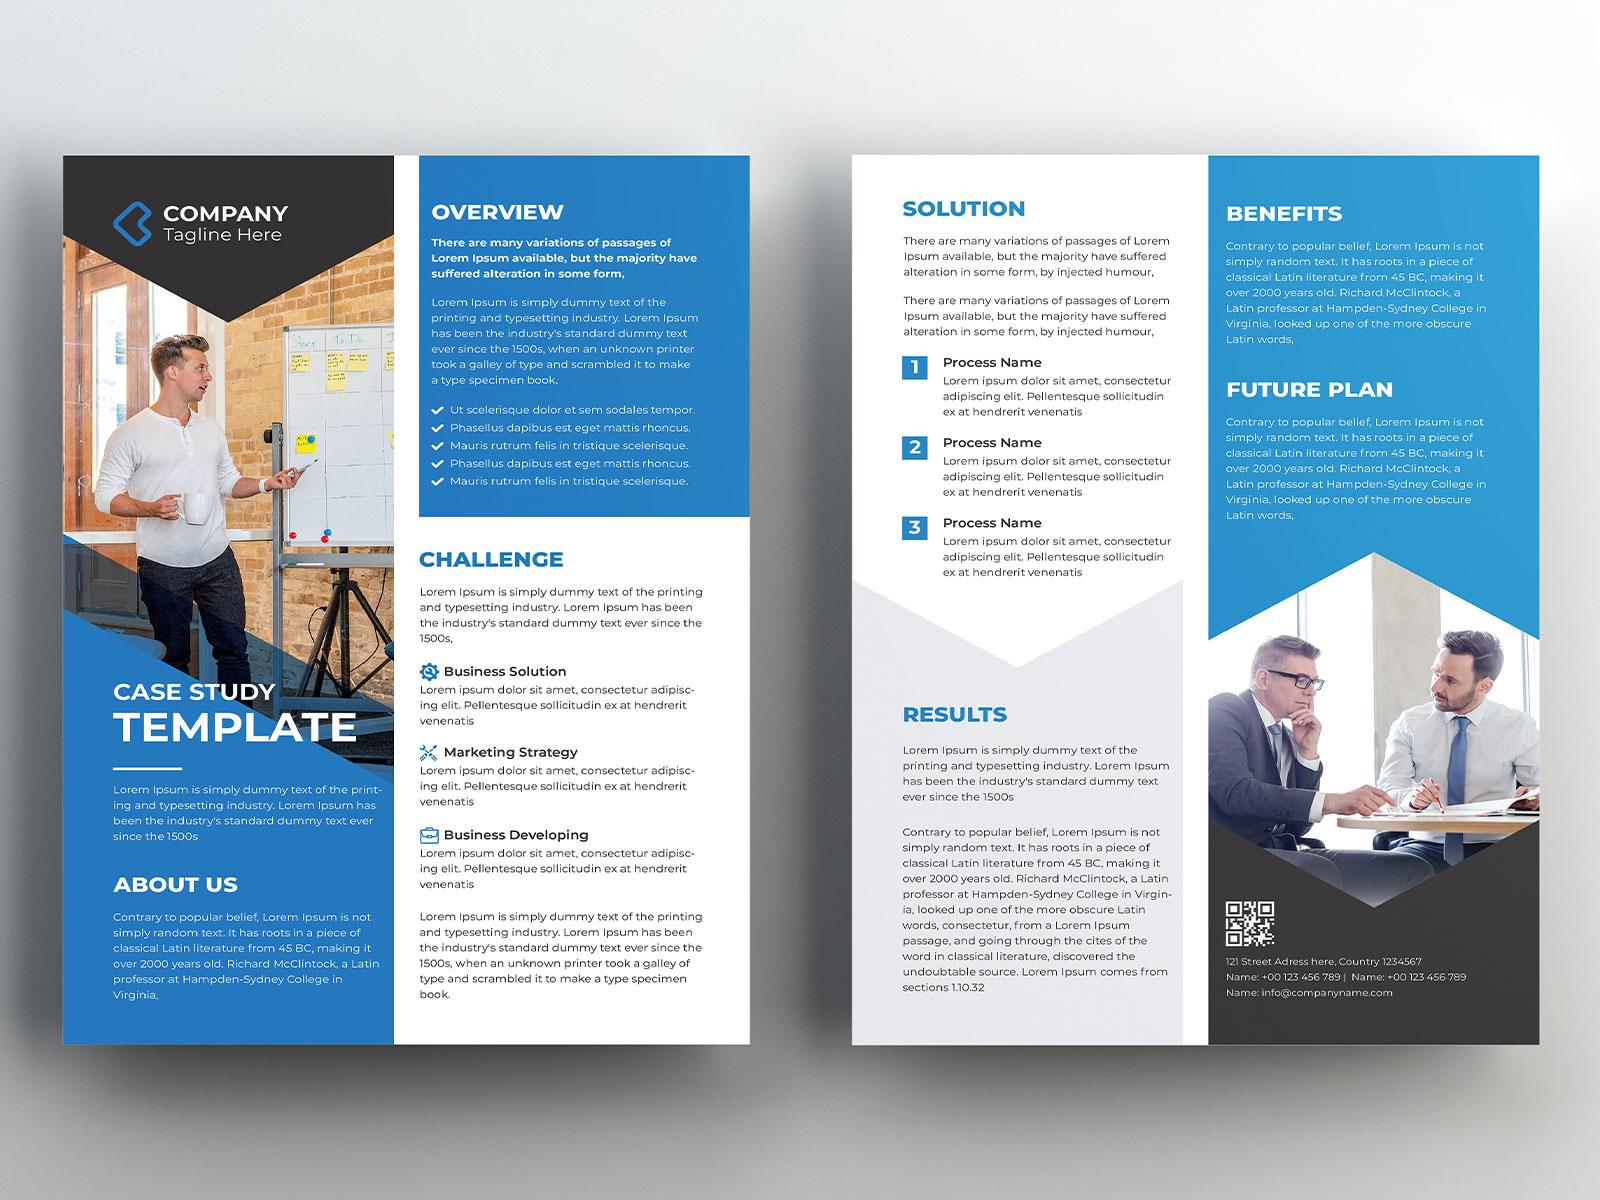 Case Study Template by Shah jahan on Dribbble